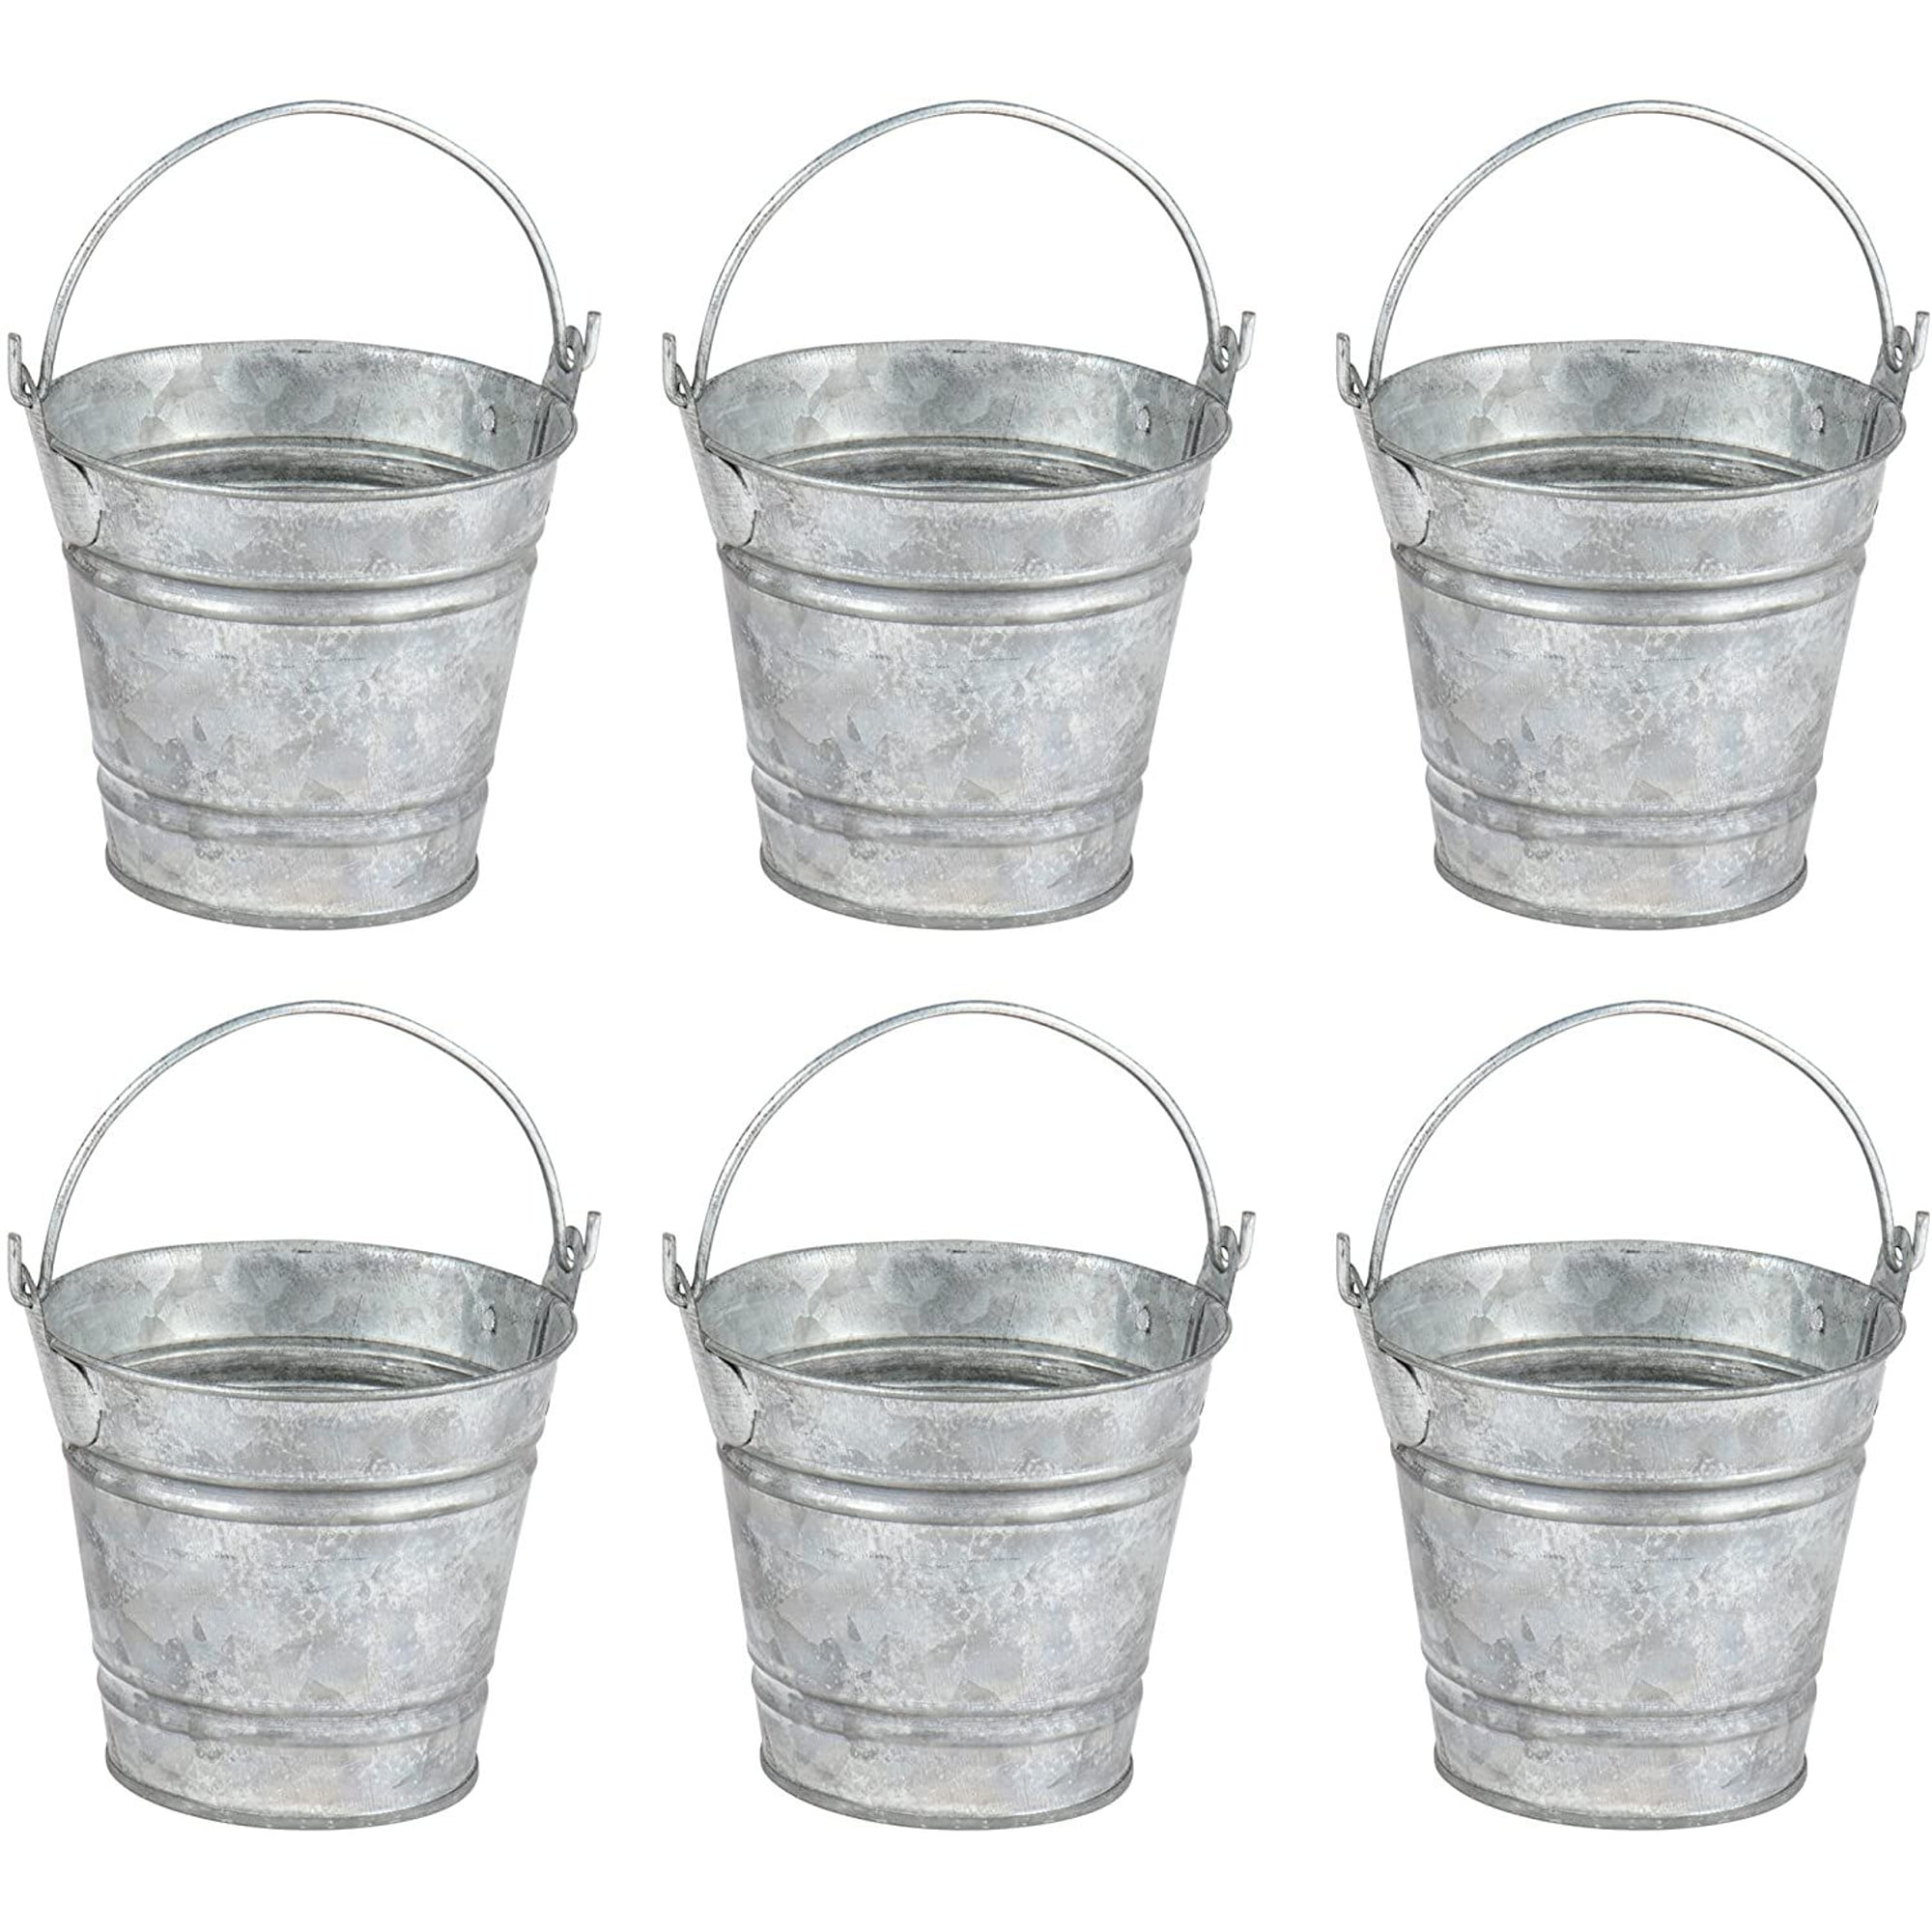 Colored Mini Metal Buckets - 3-Pack Colorful Tin Pails with Handles,  Small-Sized for The Beach, Party Favors, Easter, Candy, or Garden;  5.25X3.75X4.75; Emerald color 